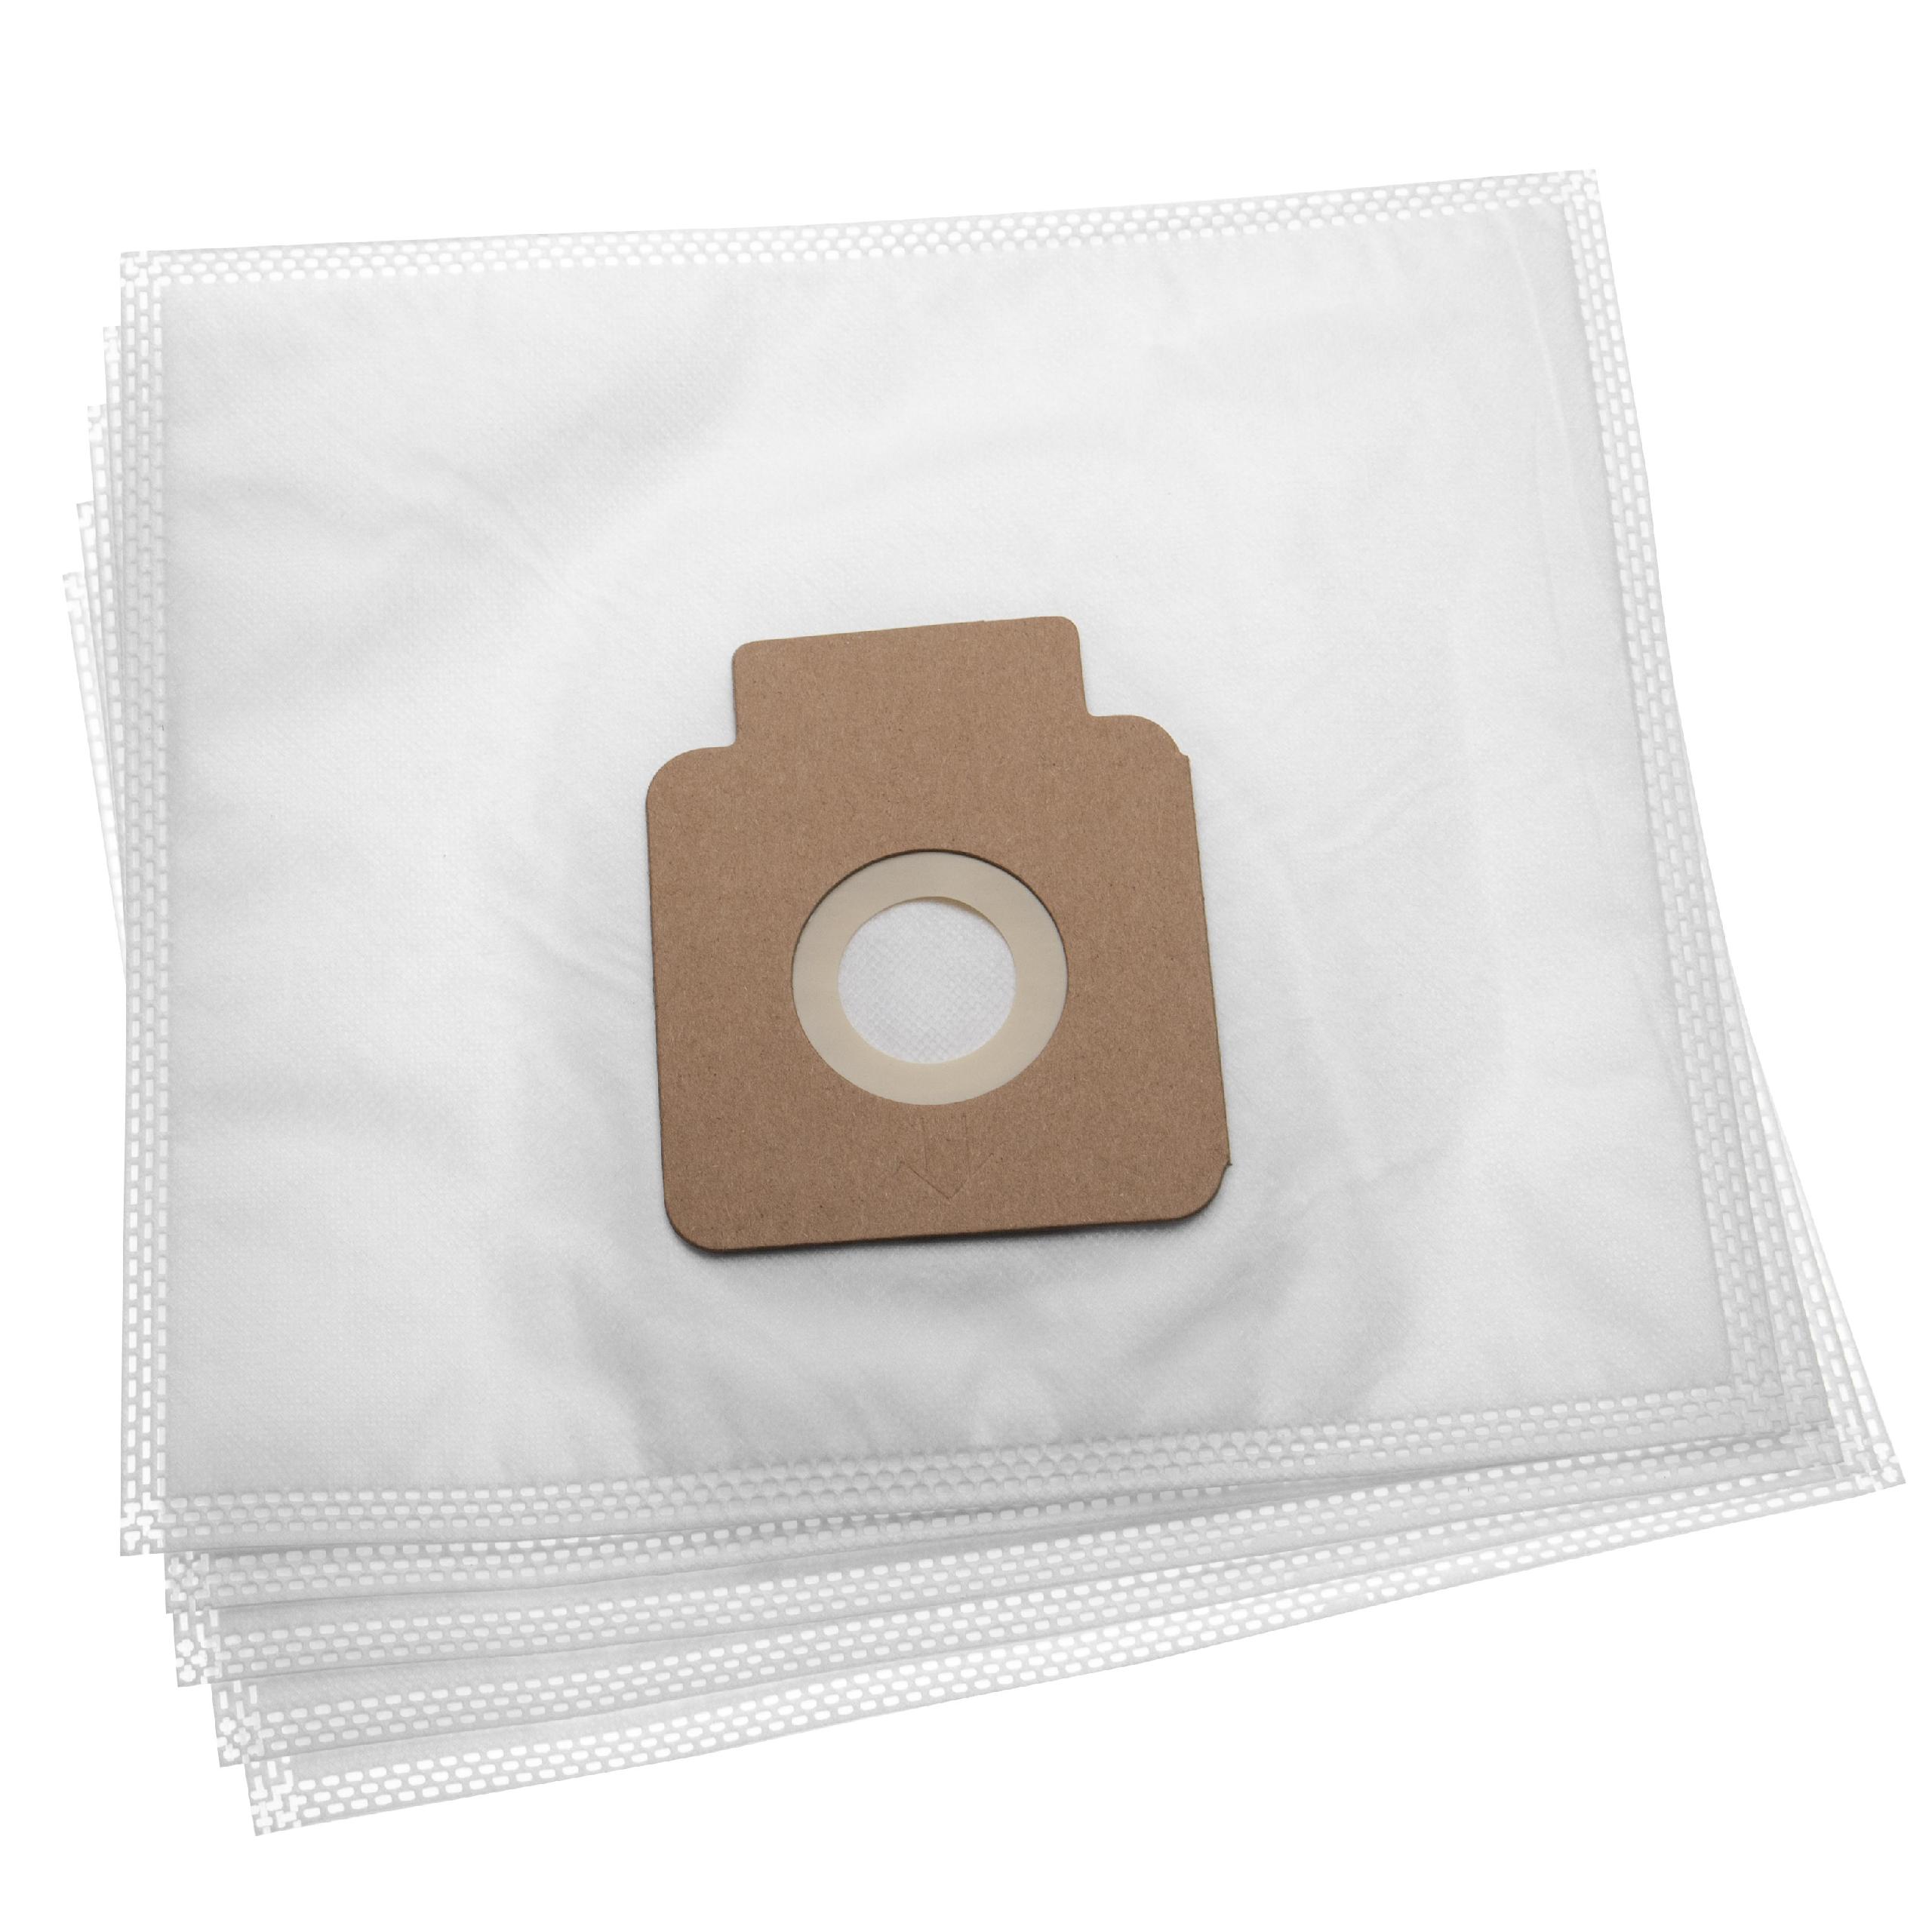 5x Vacuum Cleaner Bag replaces Hoover H58, 35600536, H64, H63 for Privileg - microfleece